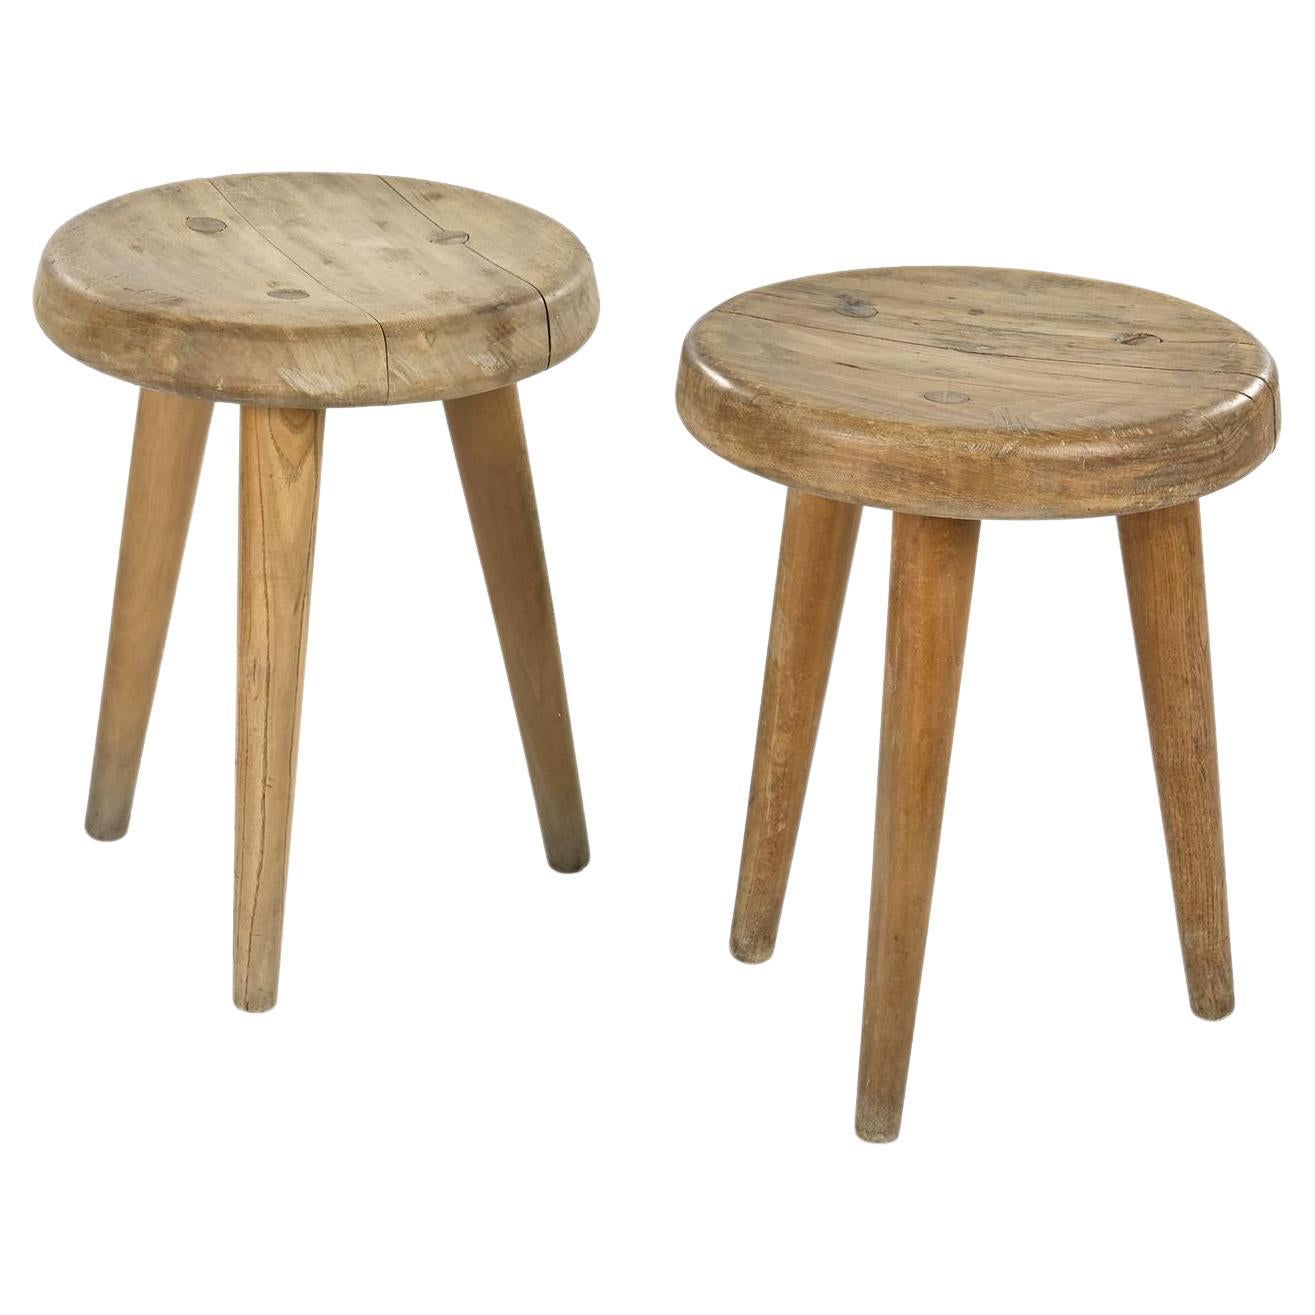 Pair of 1940s Stools in the manner of Charlotte Perriand For Sale